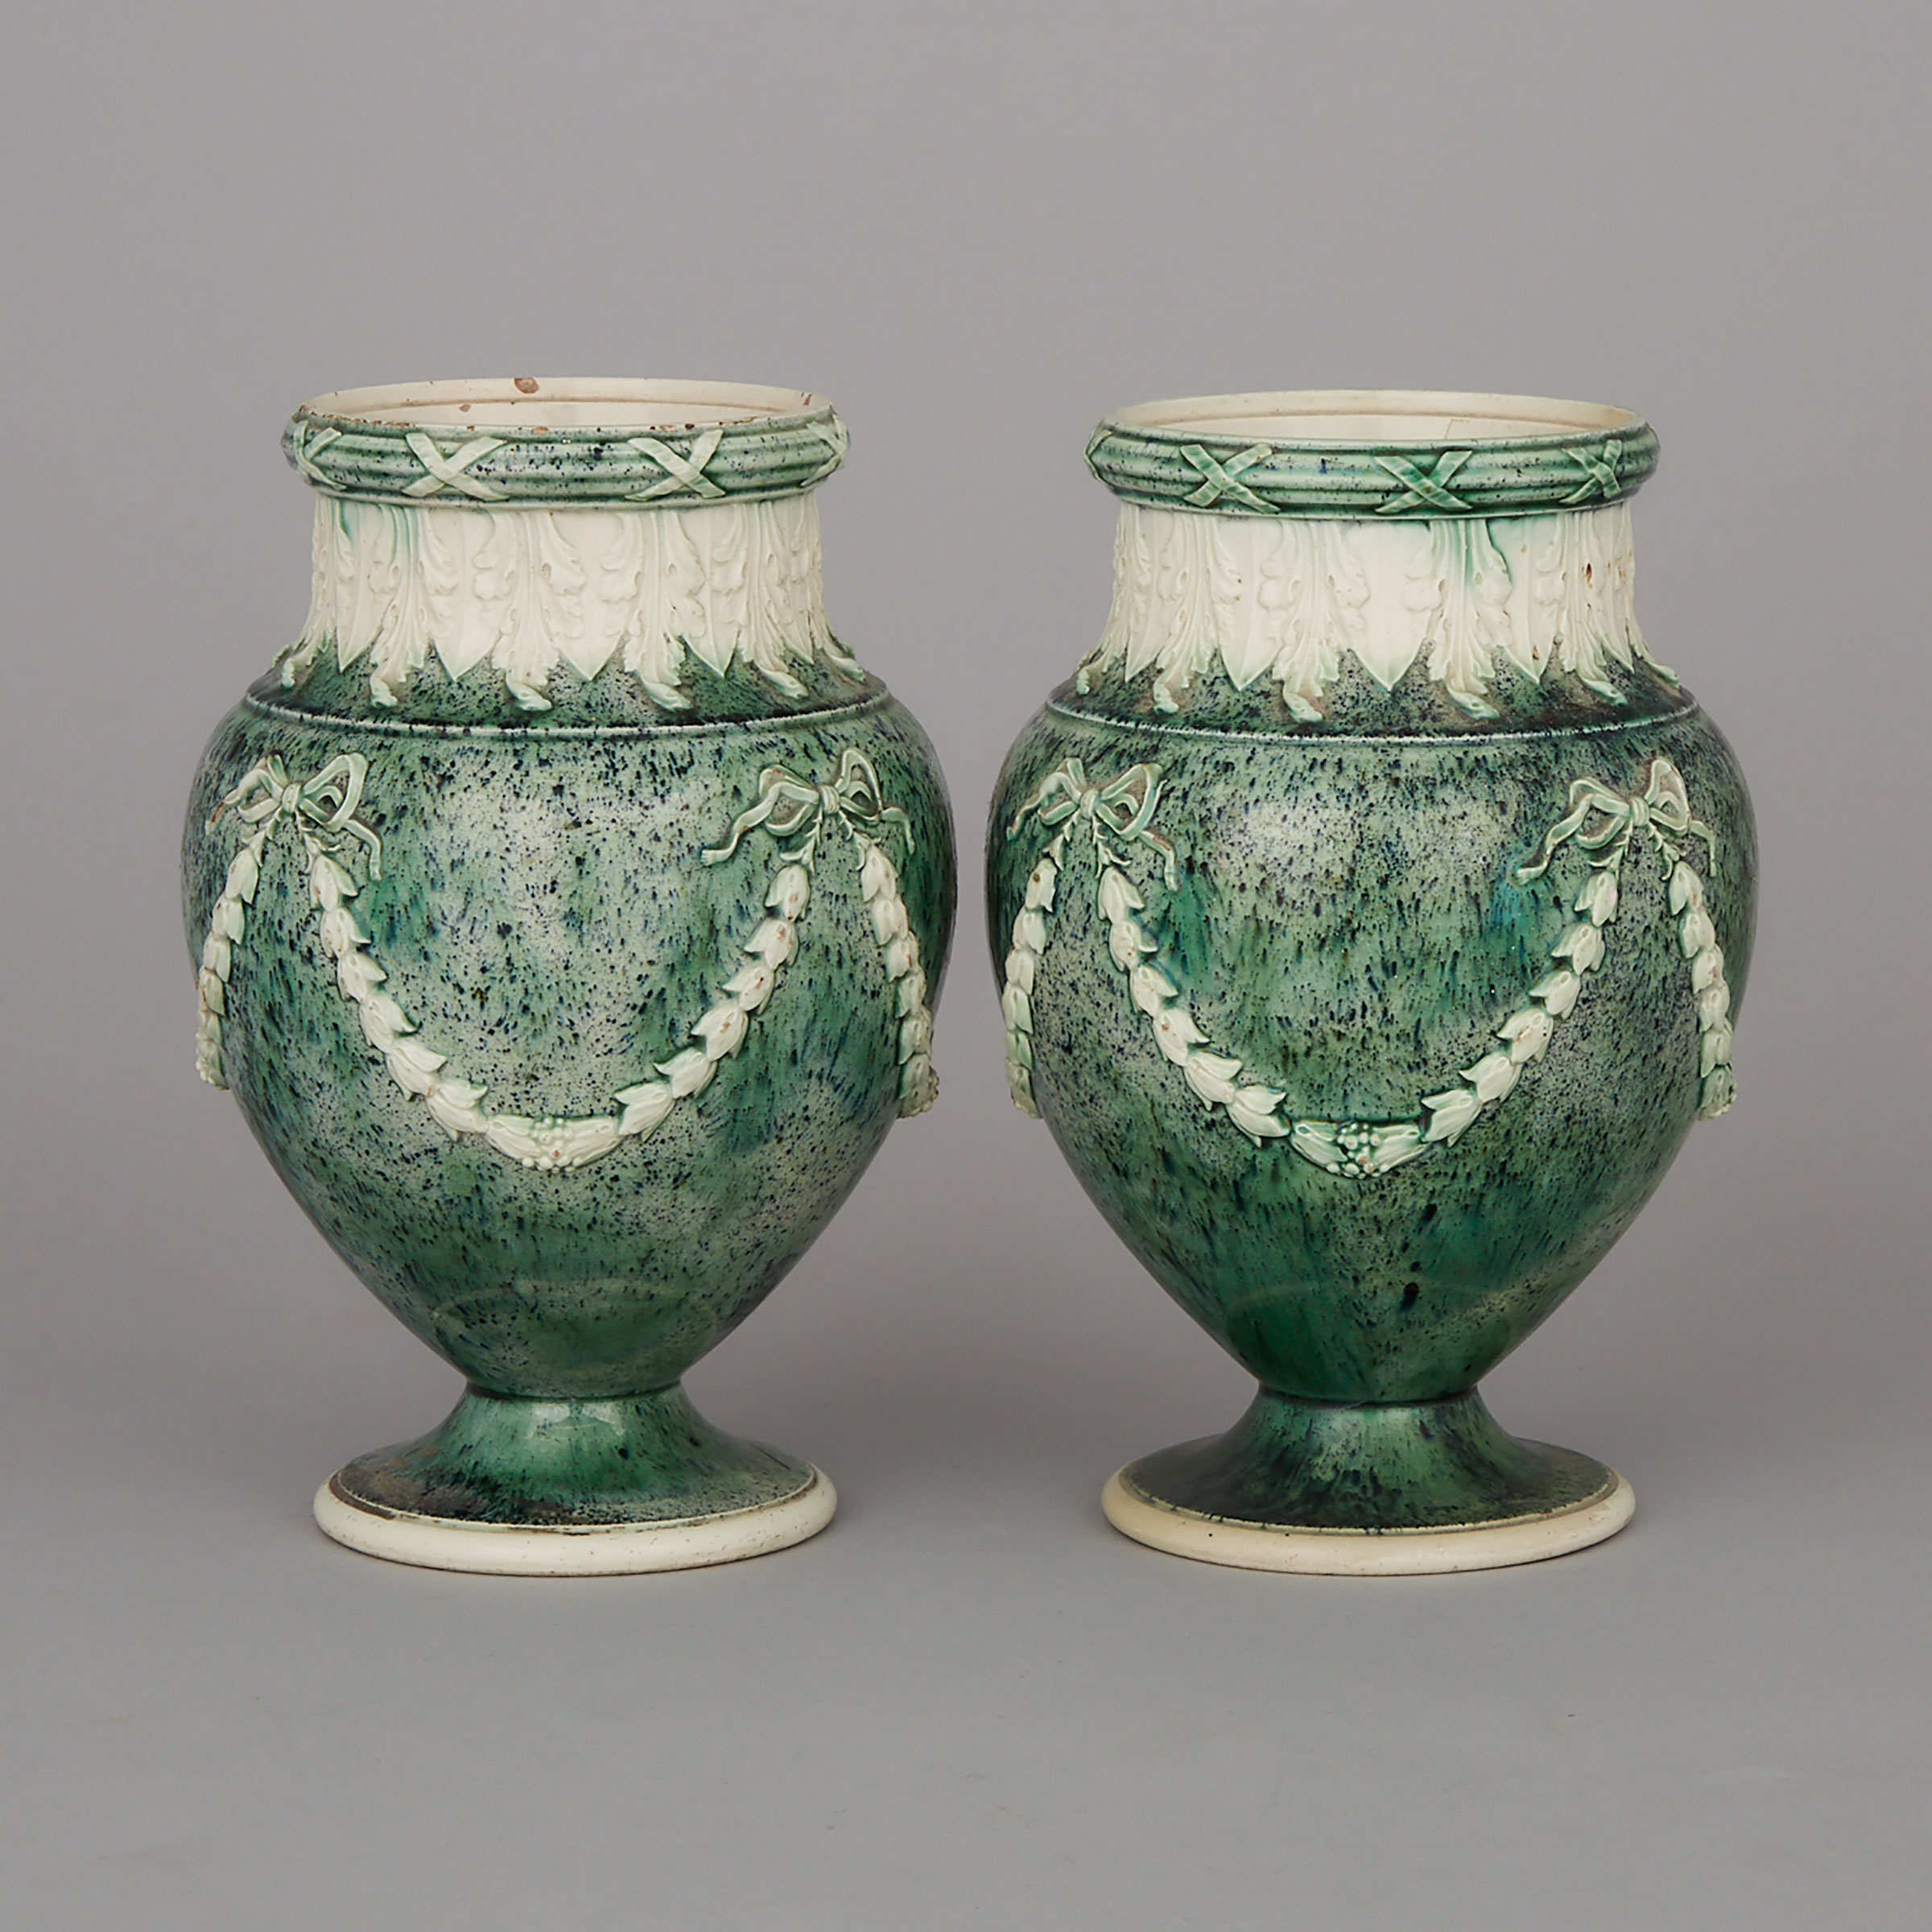 Pair of Wedgwood ‘Porphyry’ Vases, late 18th century